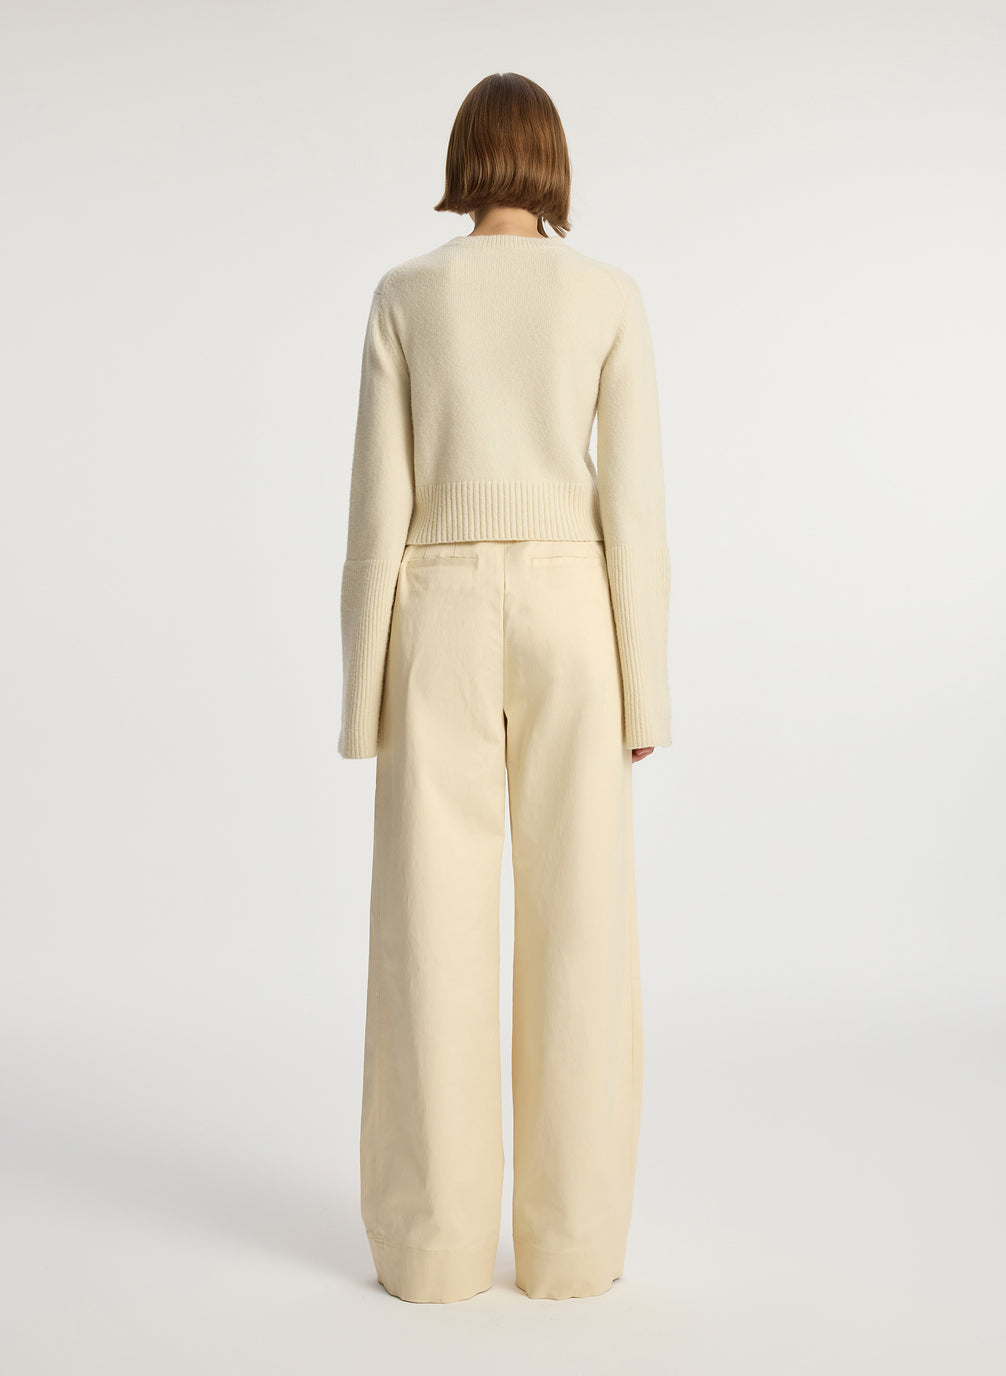 back view of woman wearing cream sweater and beige pants